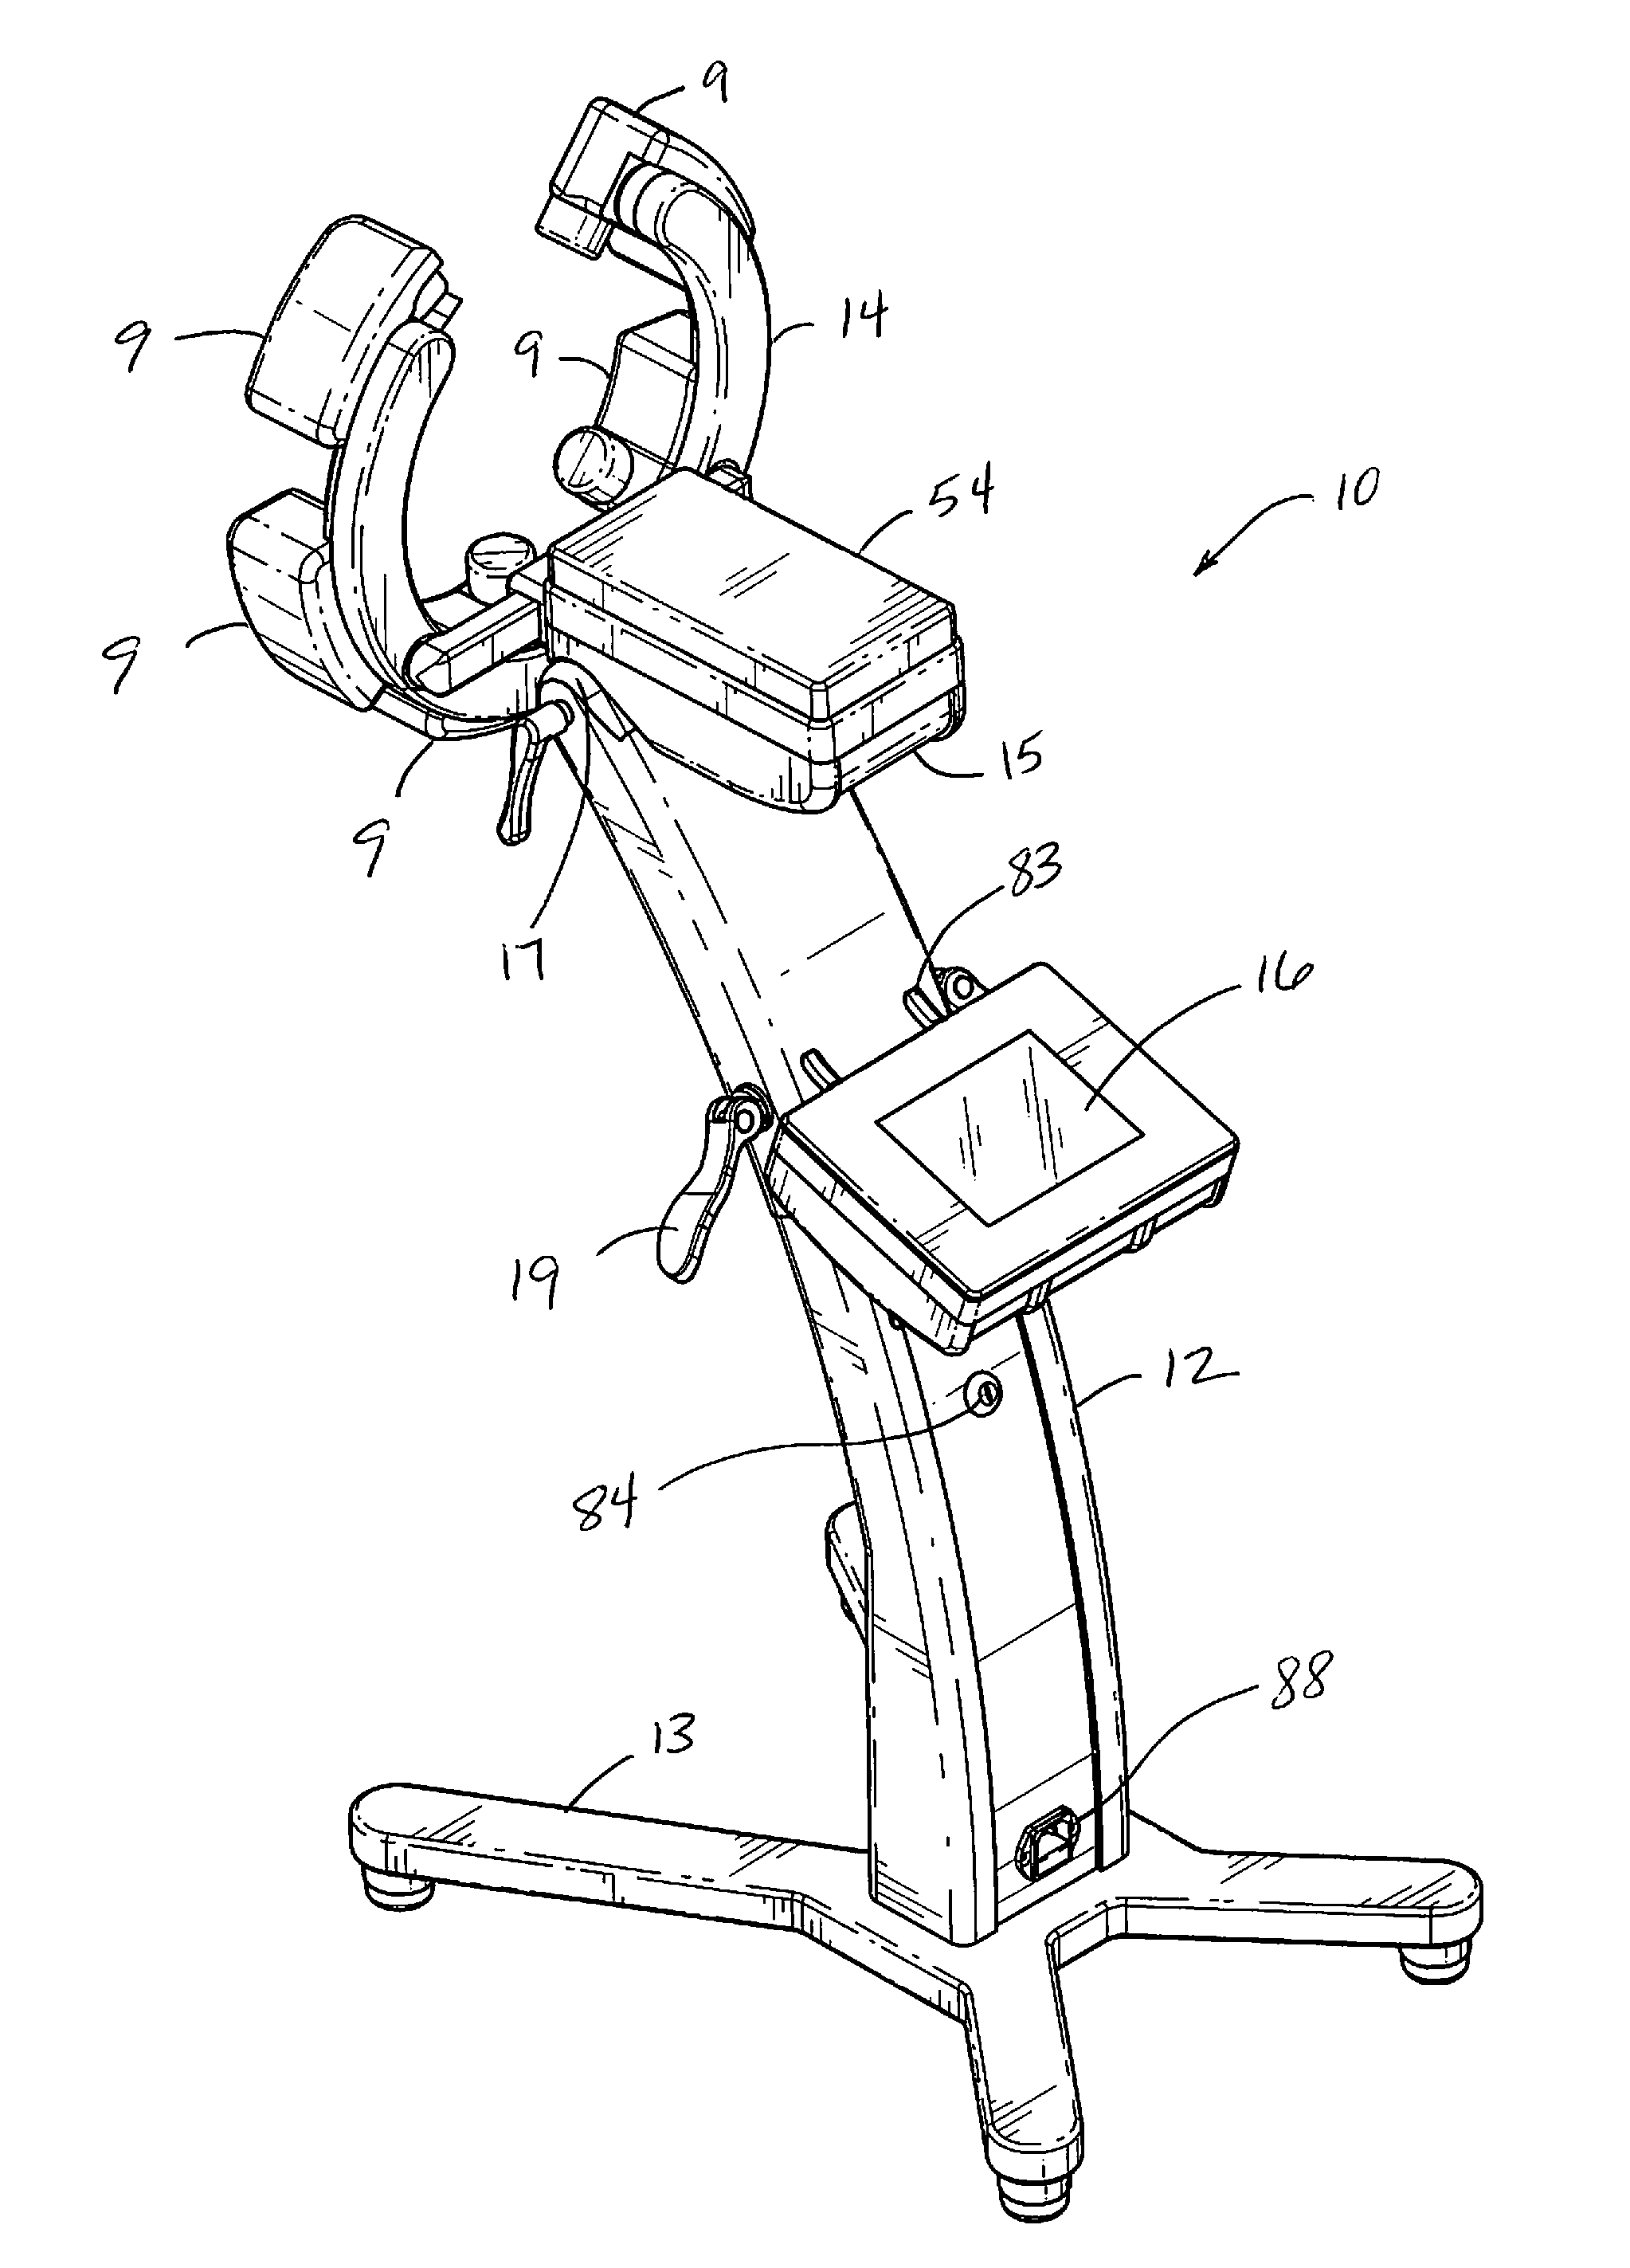 Low level laser therapy device with open bore